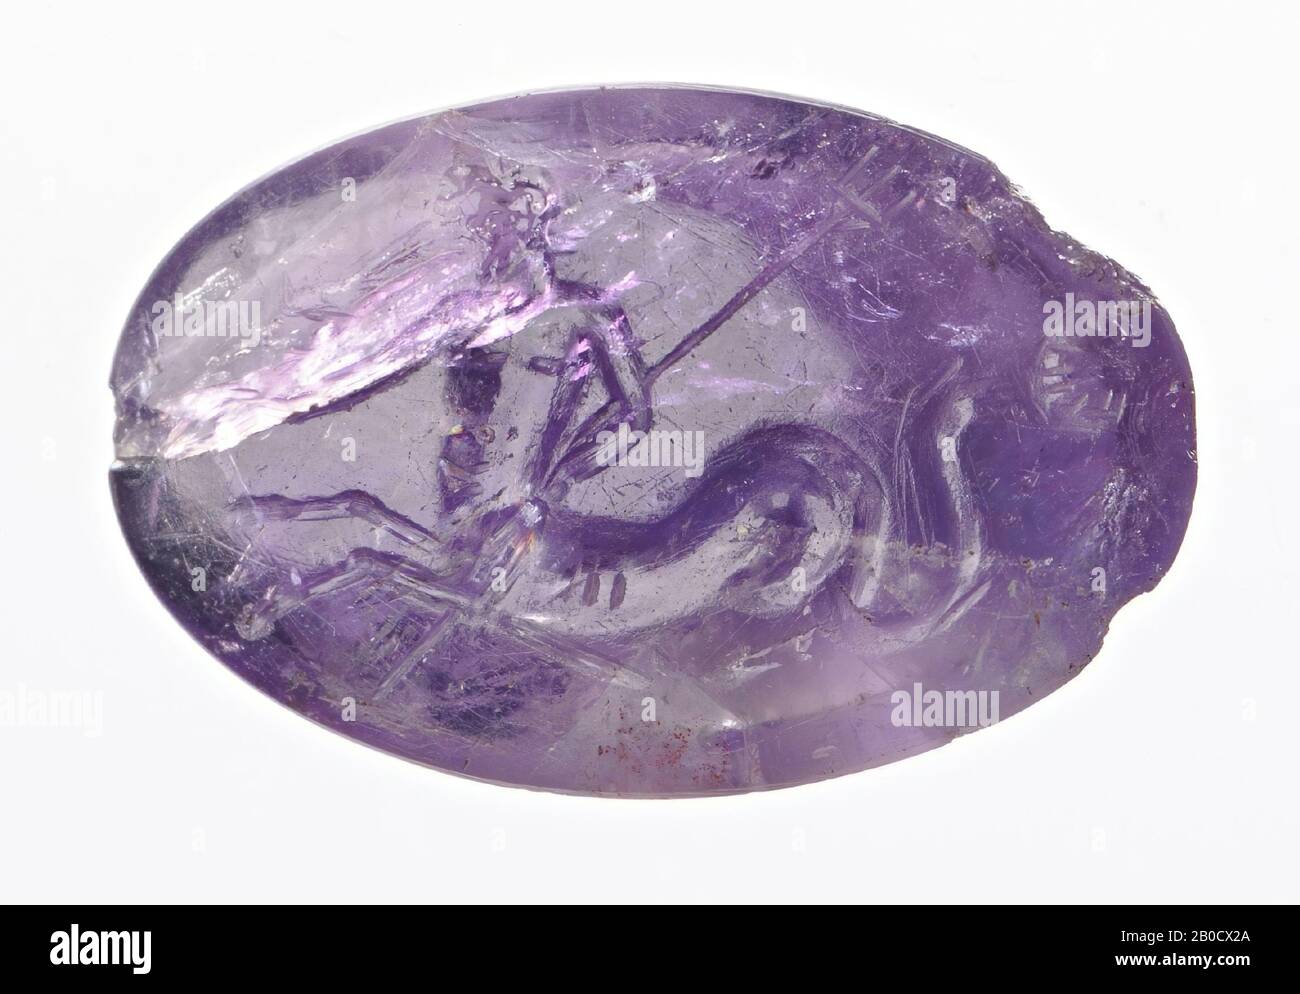 Vz: a bearded triton with a large decorative fish tail has a long shell in its right hand and in its left hand a trident that runs strangely behind the body., Gem, intaglio, ringstone, amethyst, Color: purple, Form : oval, Machined: Maaskant-Kleibrink, M., Catalog of the engraved gems in the Royal Coin Cabinet, 1978, p.60, fig.2, type F1, front convex, edge at the back cut backwards compared to front, 22 x 13 mm, D. 4.5 mm, 50 BC. - 25 AD. -50 BC Stock Photo